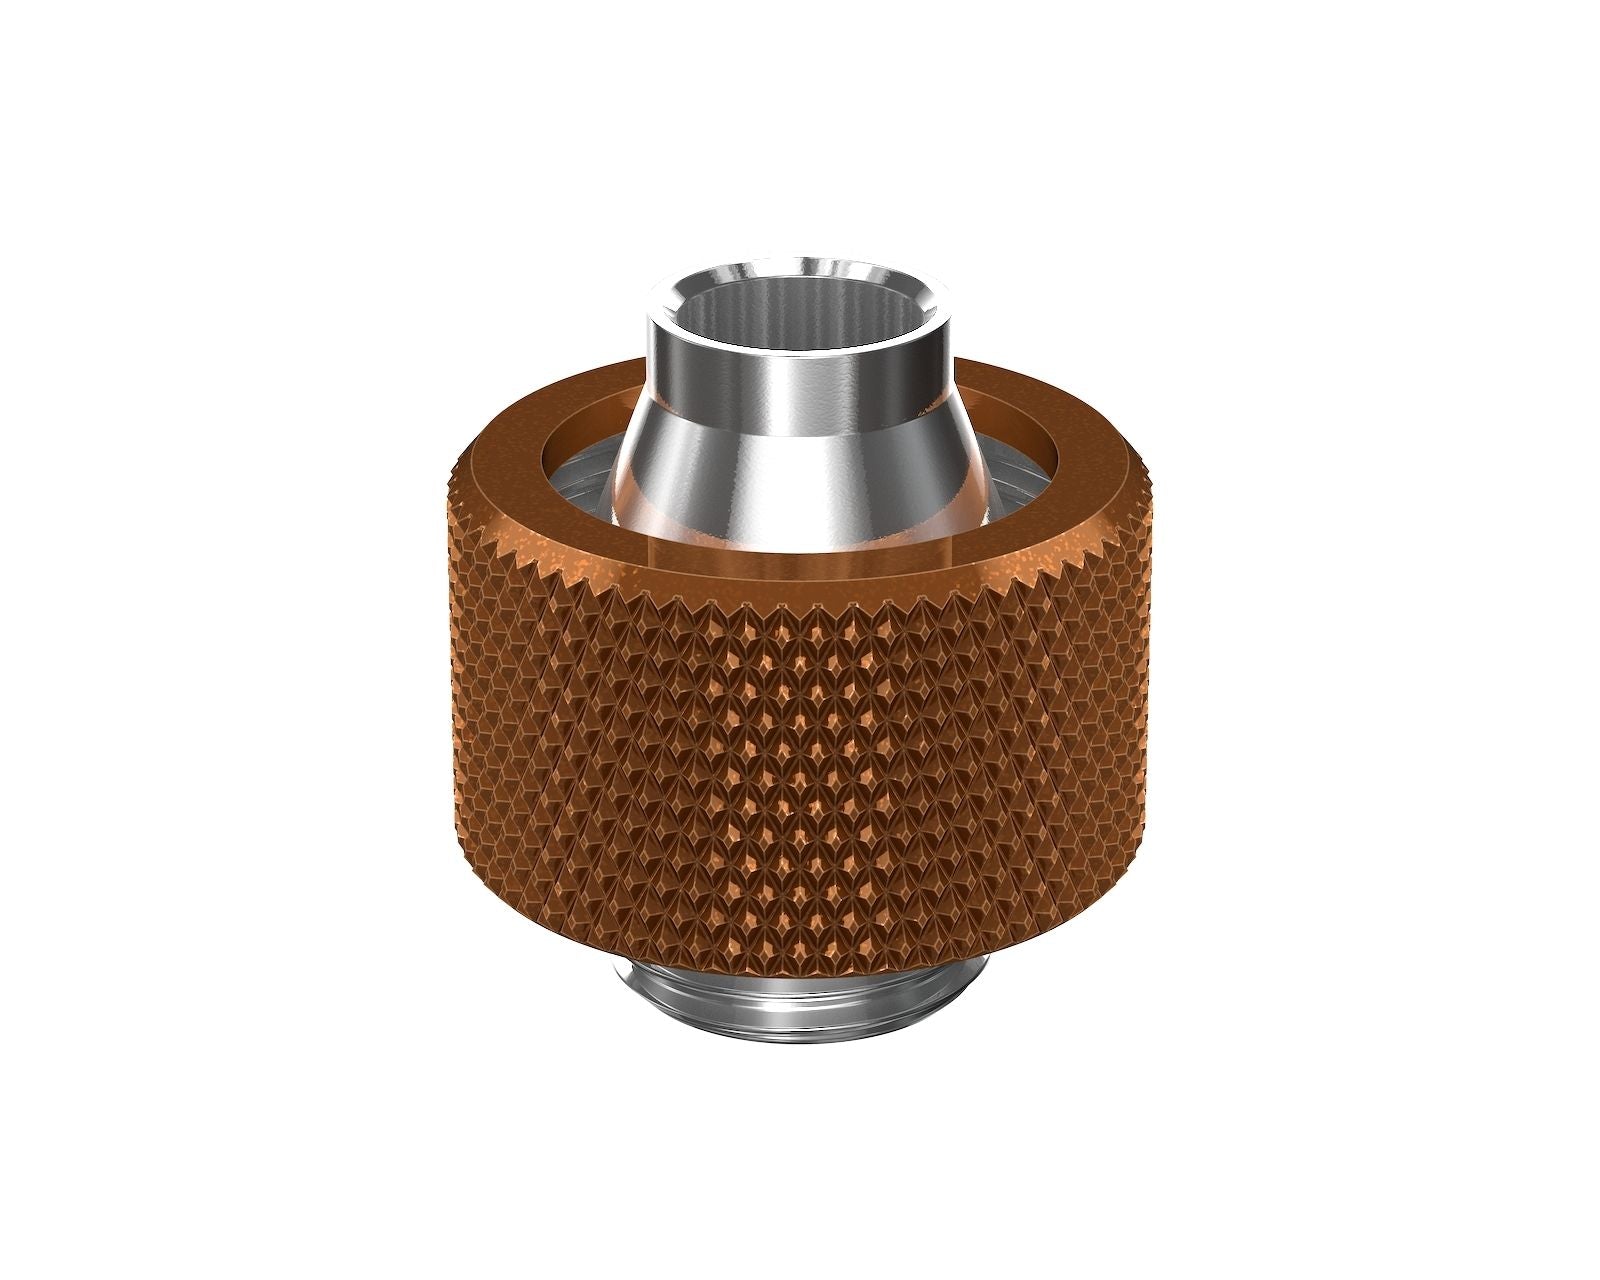 PrimoChill SecureFit SX - Premium Compression Fitting For 7/16in ID x 5/8in OD Flexible Tubing (F-SFSX758) - Available in 20+ Colors, Custom Watercooling Loop Ready - Copper